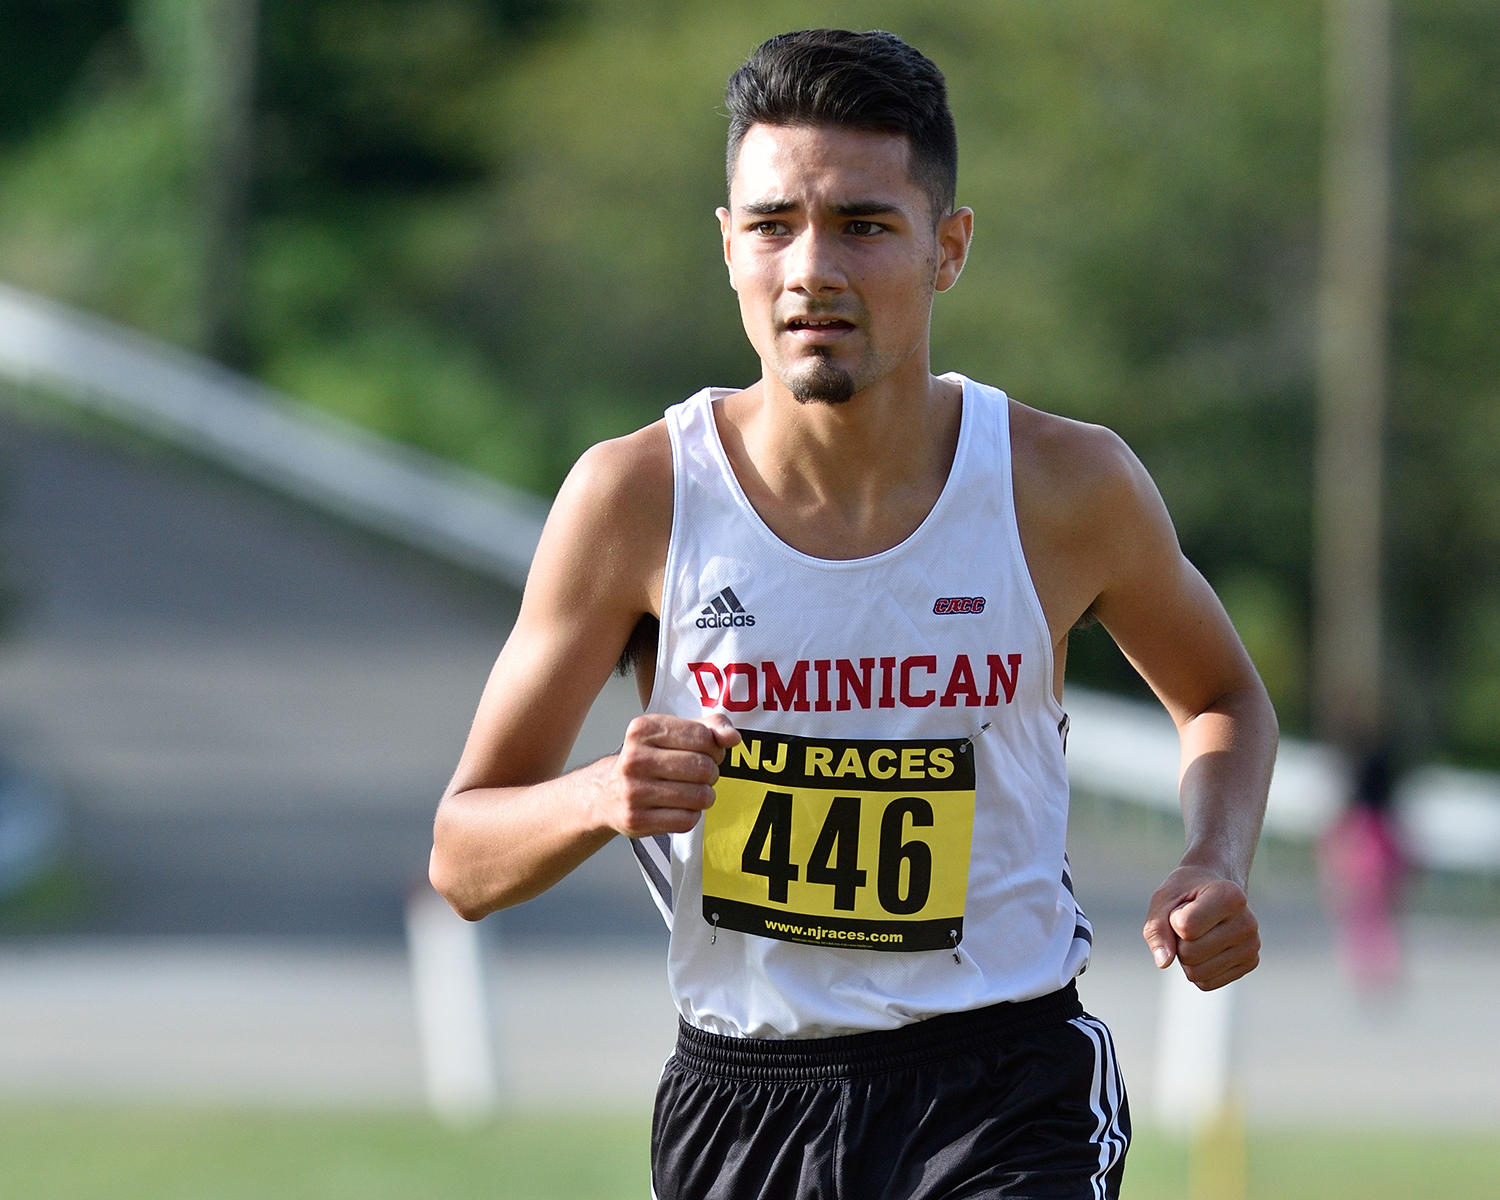 The Dominican College men's cross country team finished in eighth place at the Purchase College Invitational